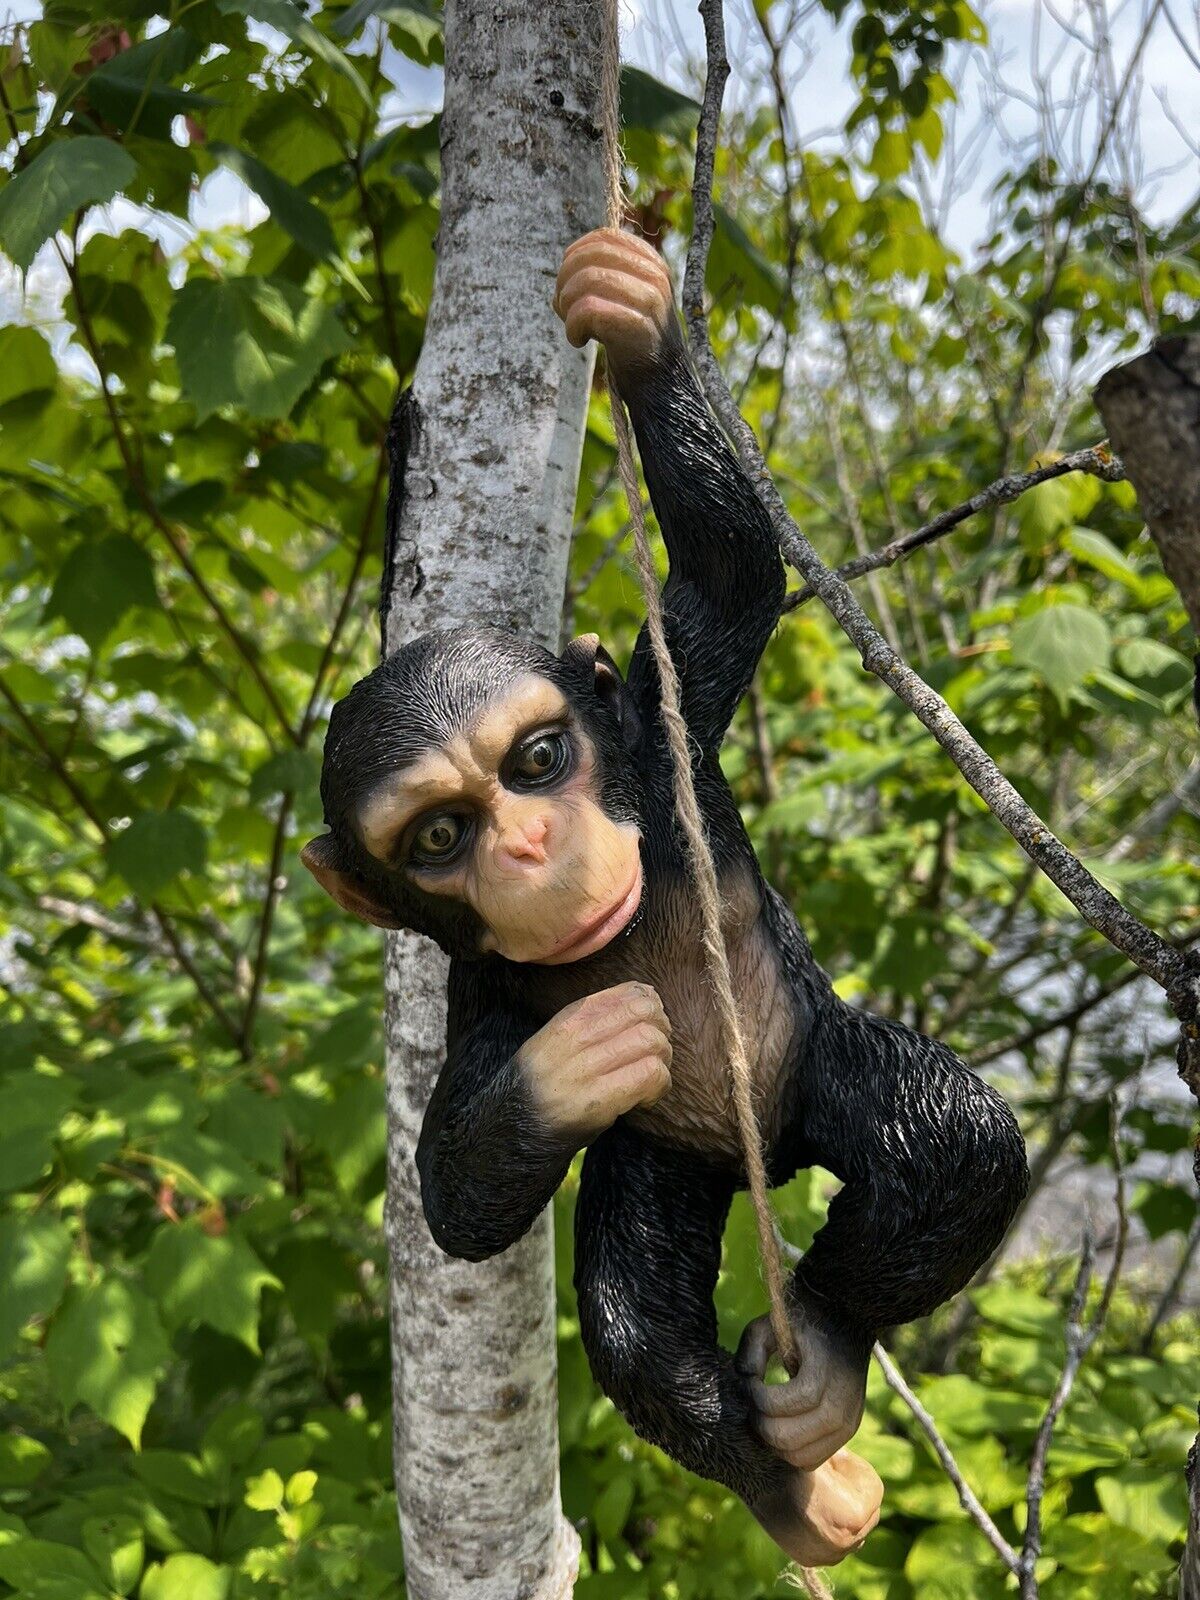 Chimpanzee Going for a Ride on Swinging Rope, Monkey  Swinger Garden Decoration